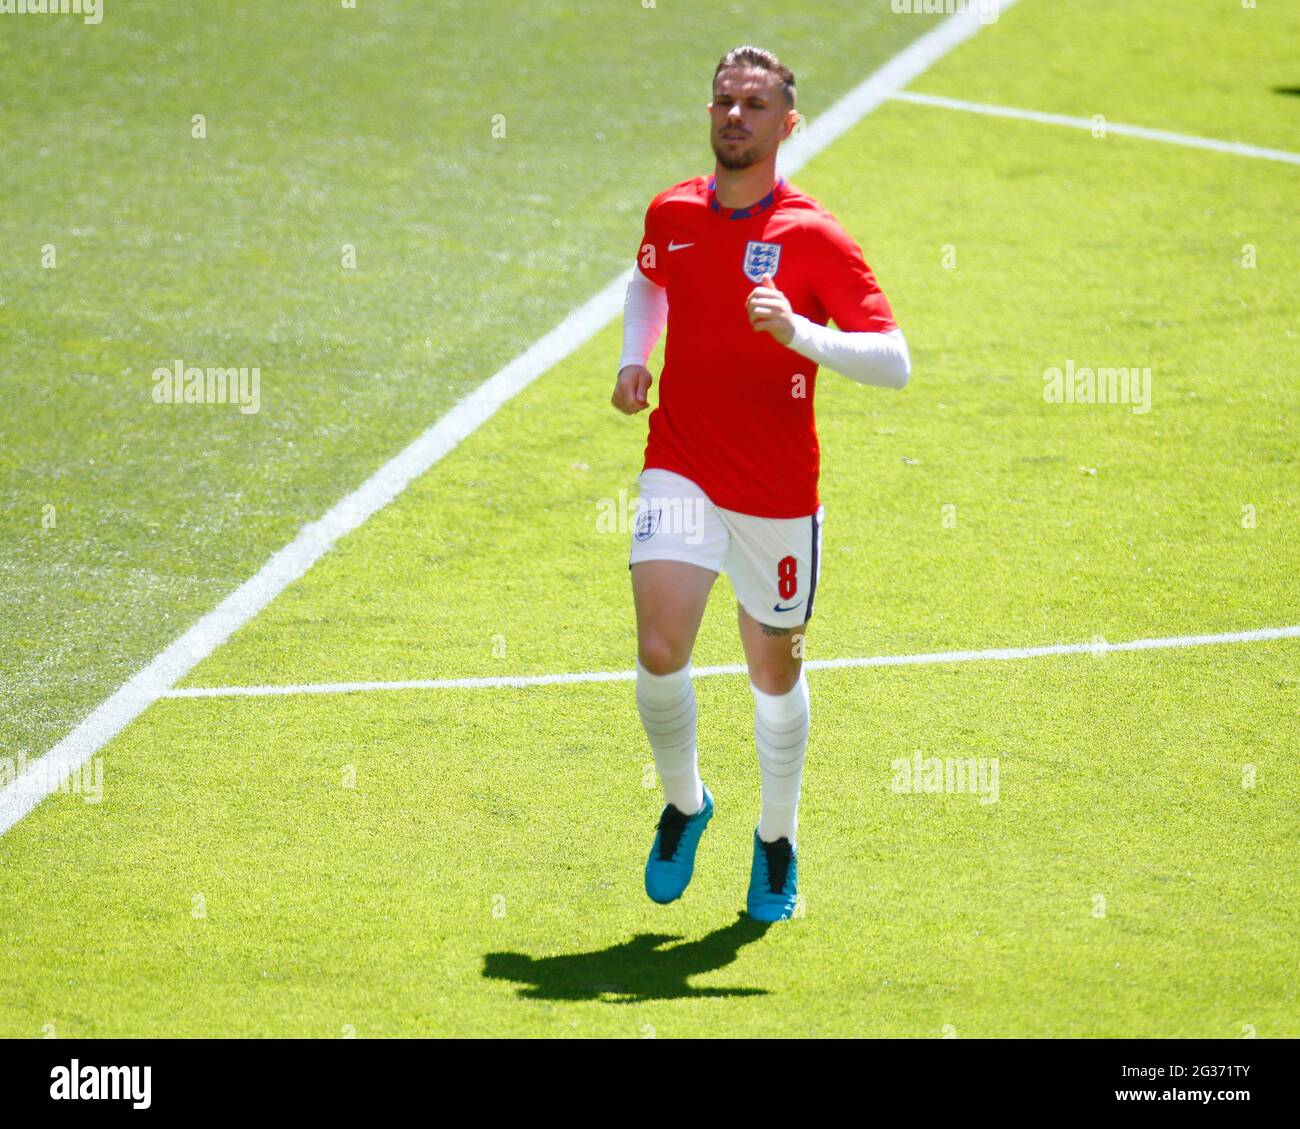 WEMBLEY, United Kingdom, JUNE 13: Jordan Henderson (Liverpool) of England during the pre-match warm-up  during European Championship Group D between E Stock Photo